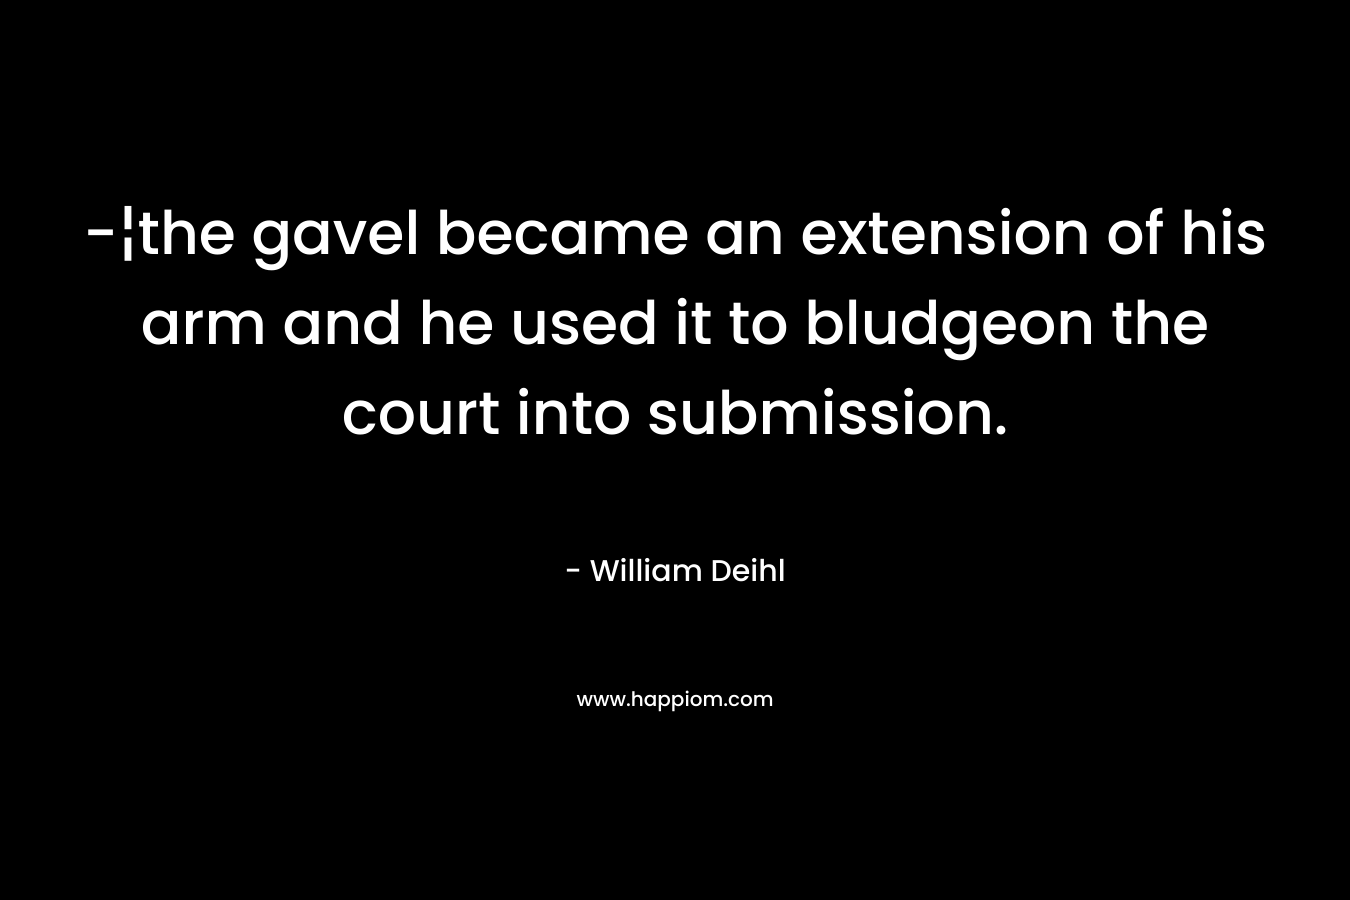 -¦the gavel became an extension of his arm and he used it to bludgeon the court into submission. – William Deihl